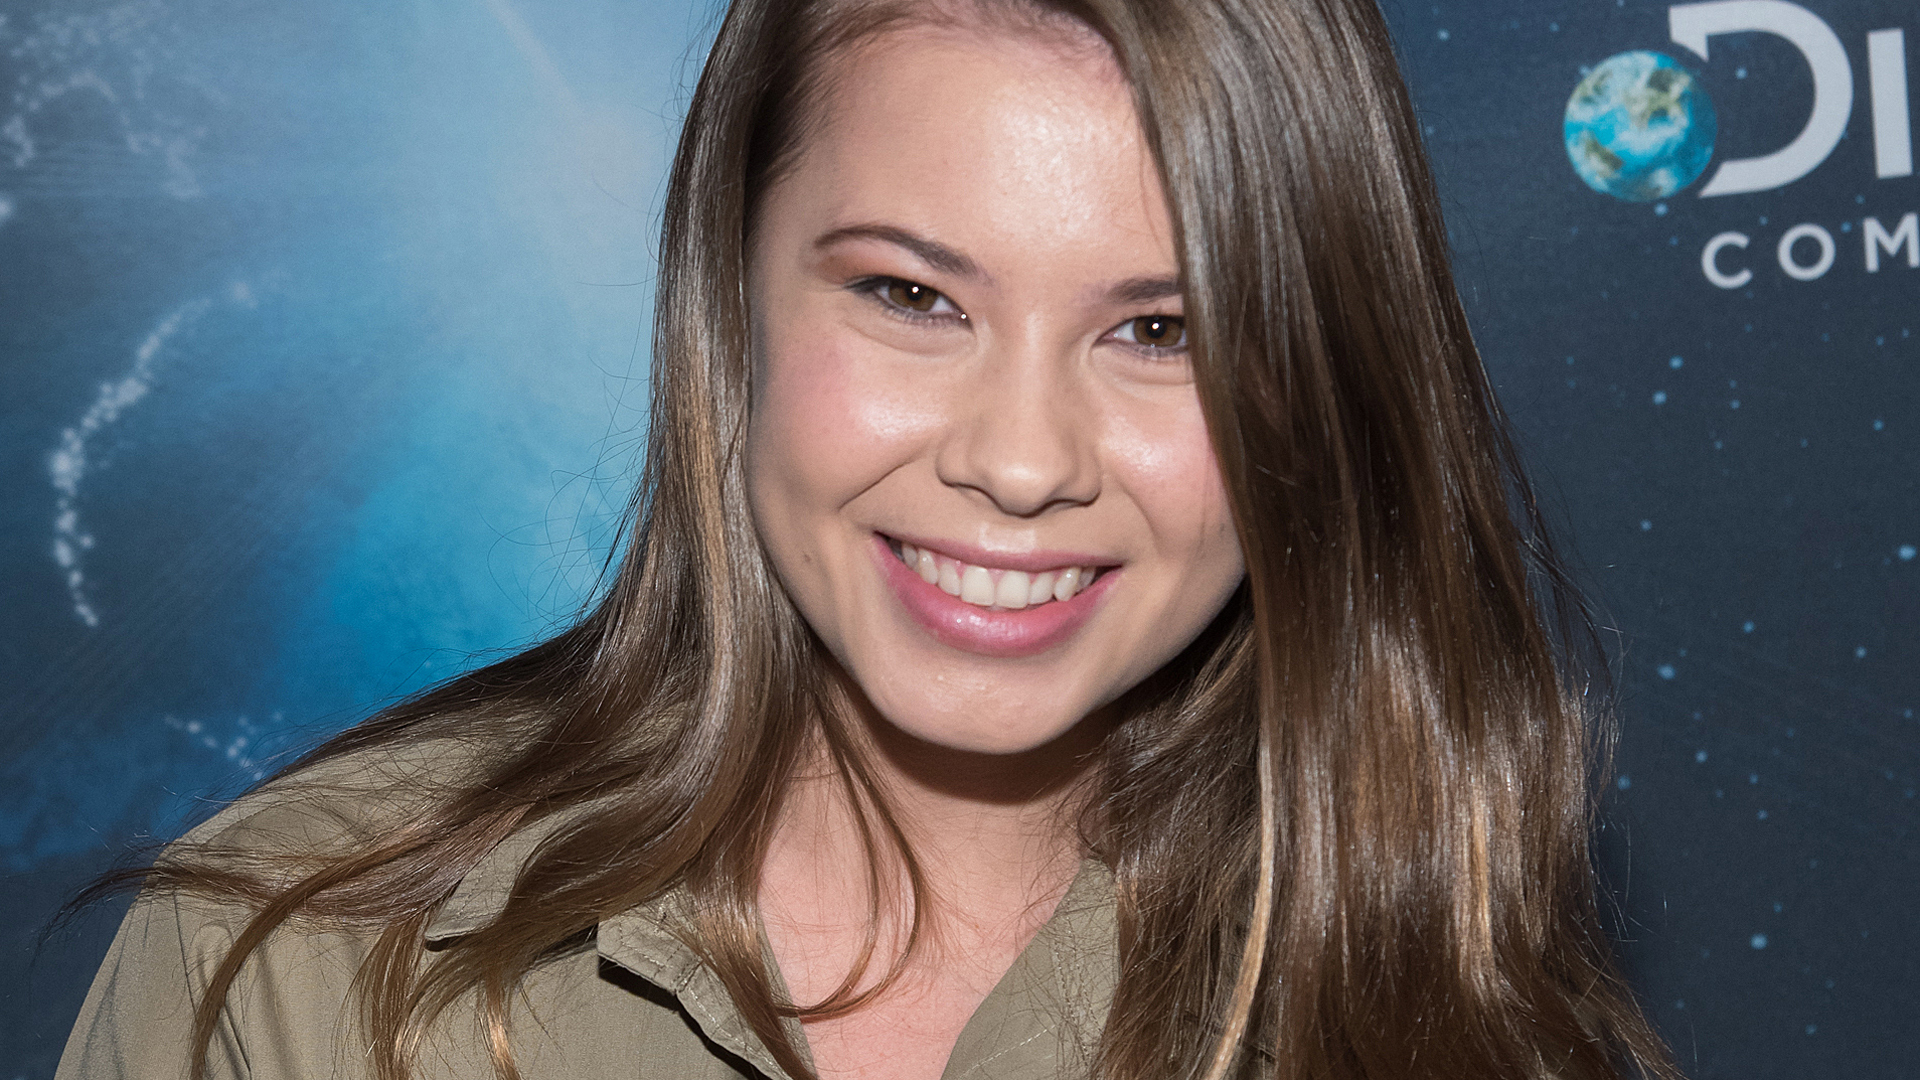 Bindi Irwin Wallpapers Images Photos Pictures Backgrounds